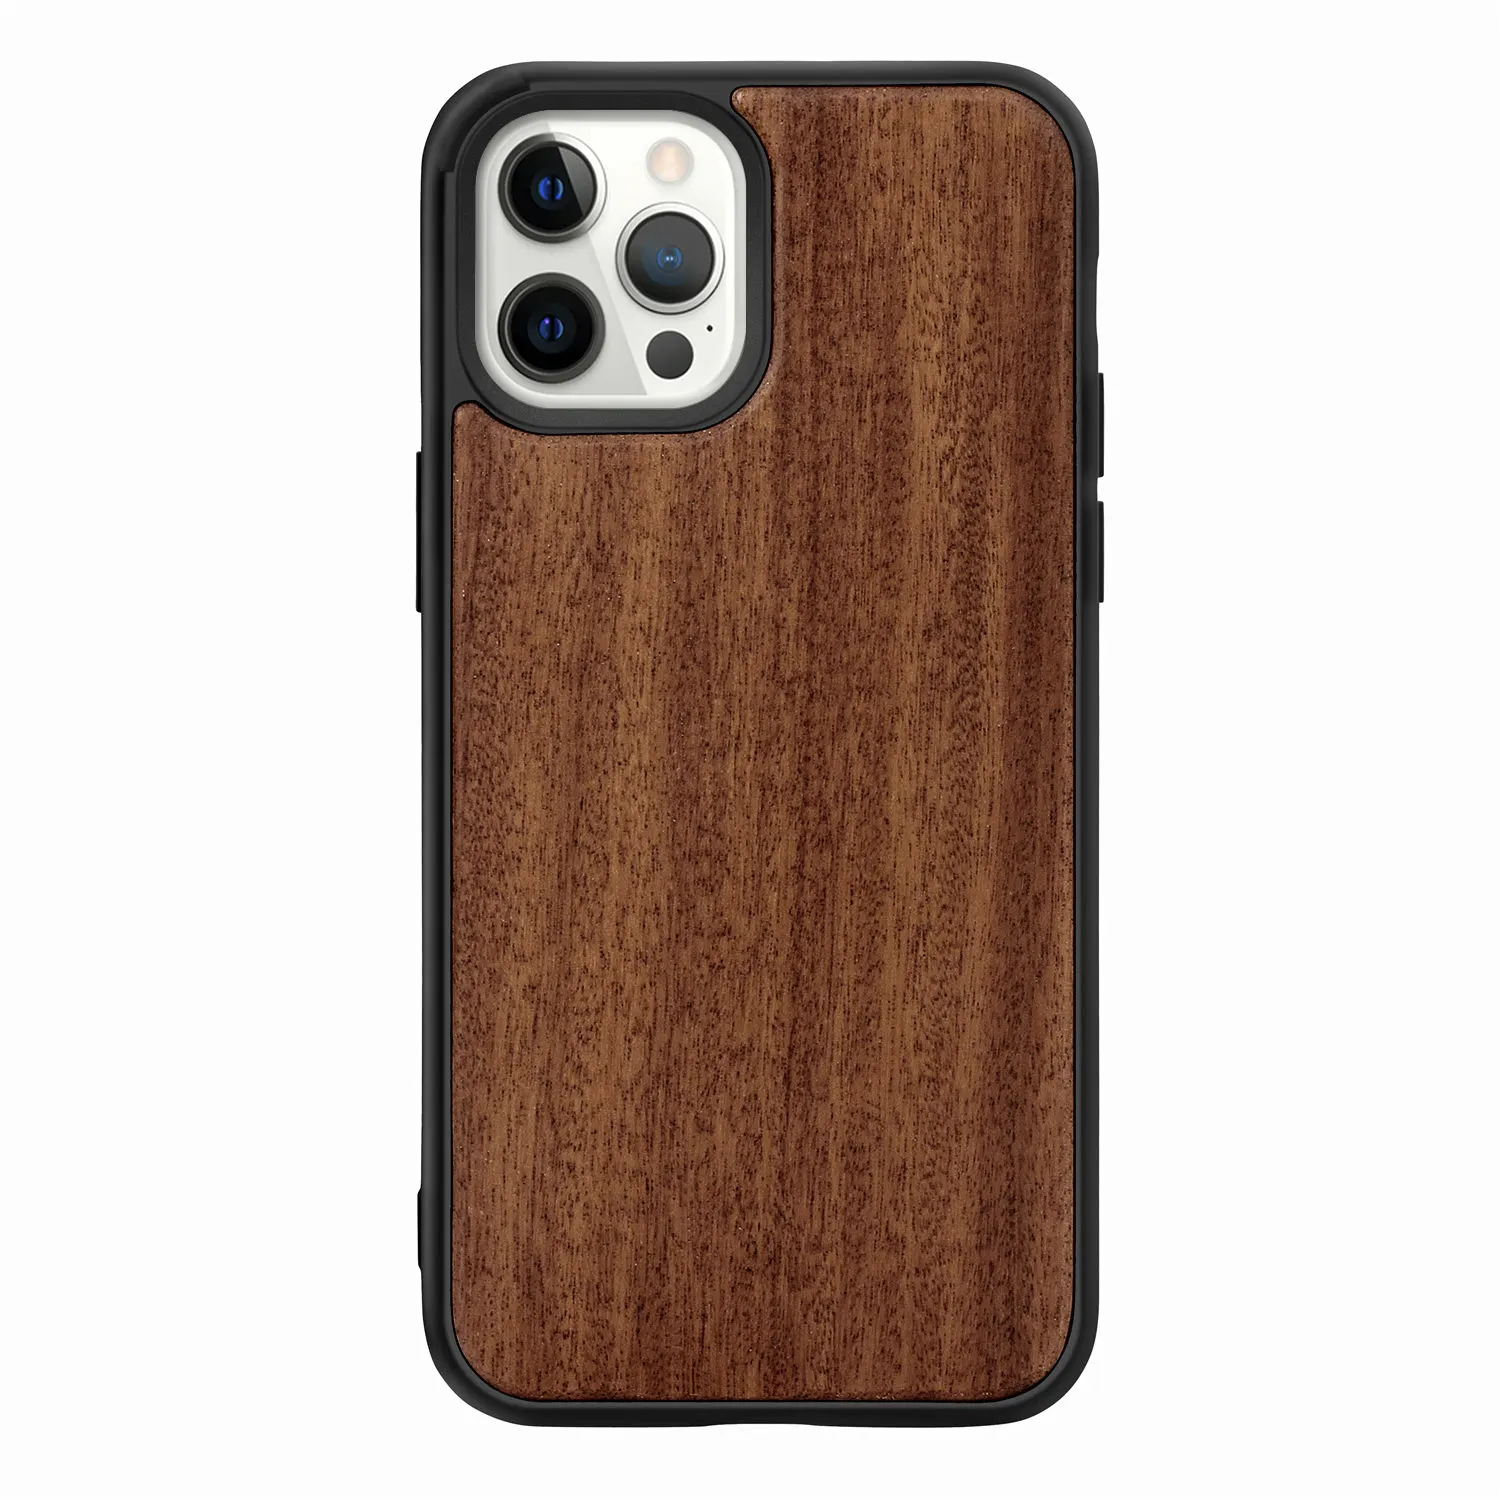 Real Wood back case for iphone 13 Mini 12 SE 2022 XR X S Max 8 7 6 Plus Genuine Bamboo Wooden Hard Phone case